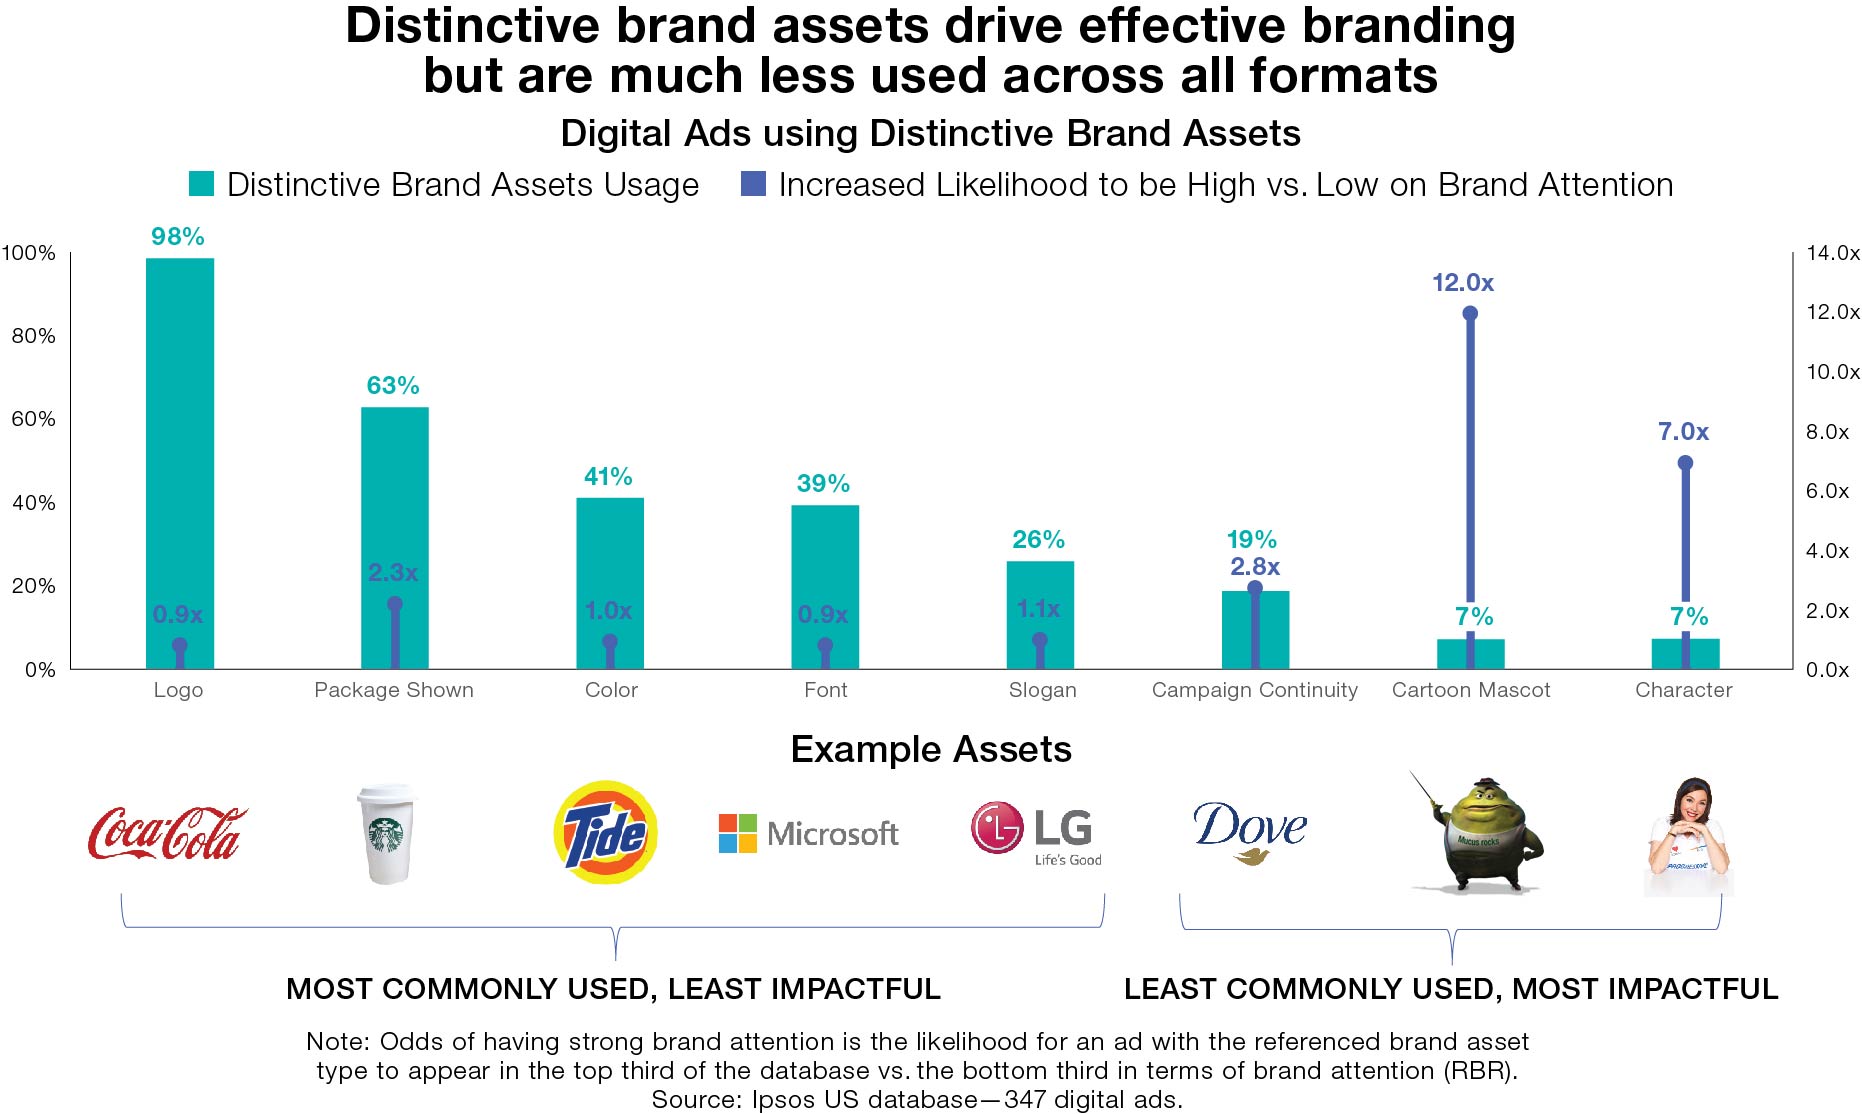 Distinctive brand assets drive effective brandingbut are much less used across all formats